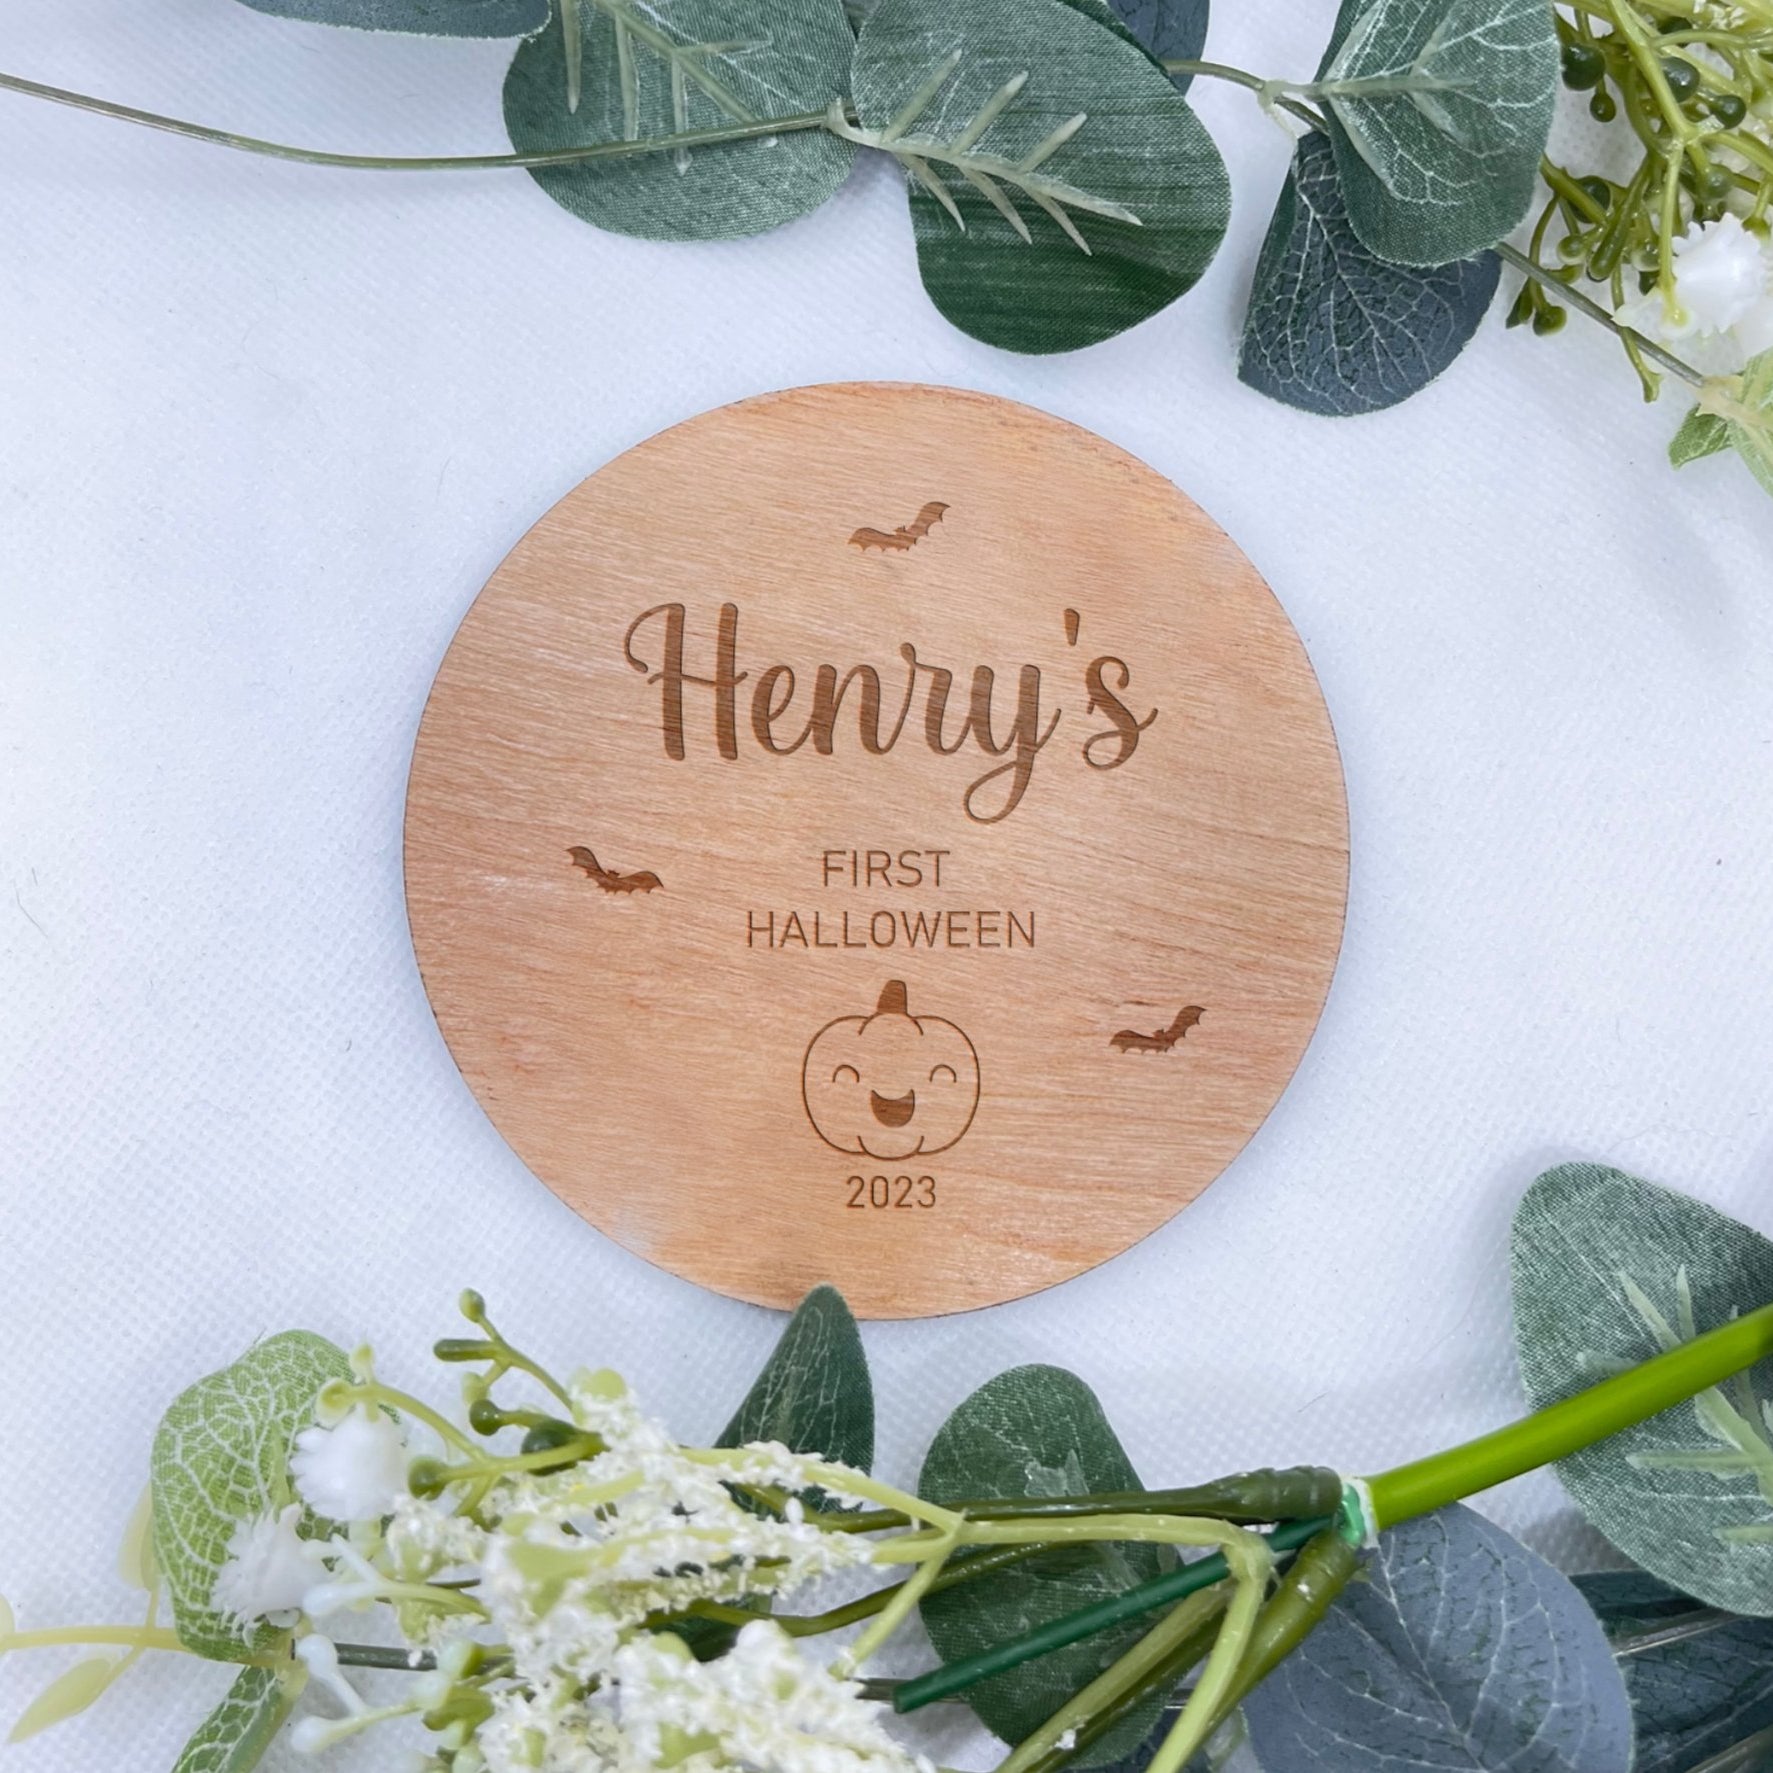 Personalised Halloween Keepsake - Cherry wood plaque with engraved pumpkin and bats. Celebrate baby's first Halloween with this adorable custom memento. 